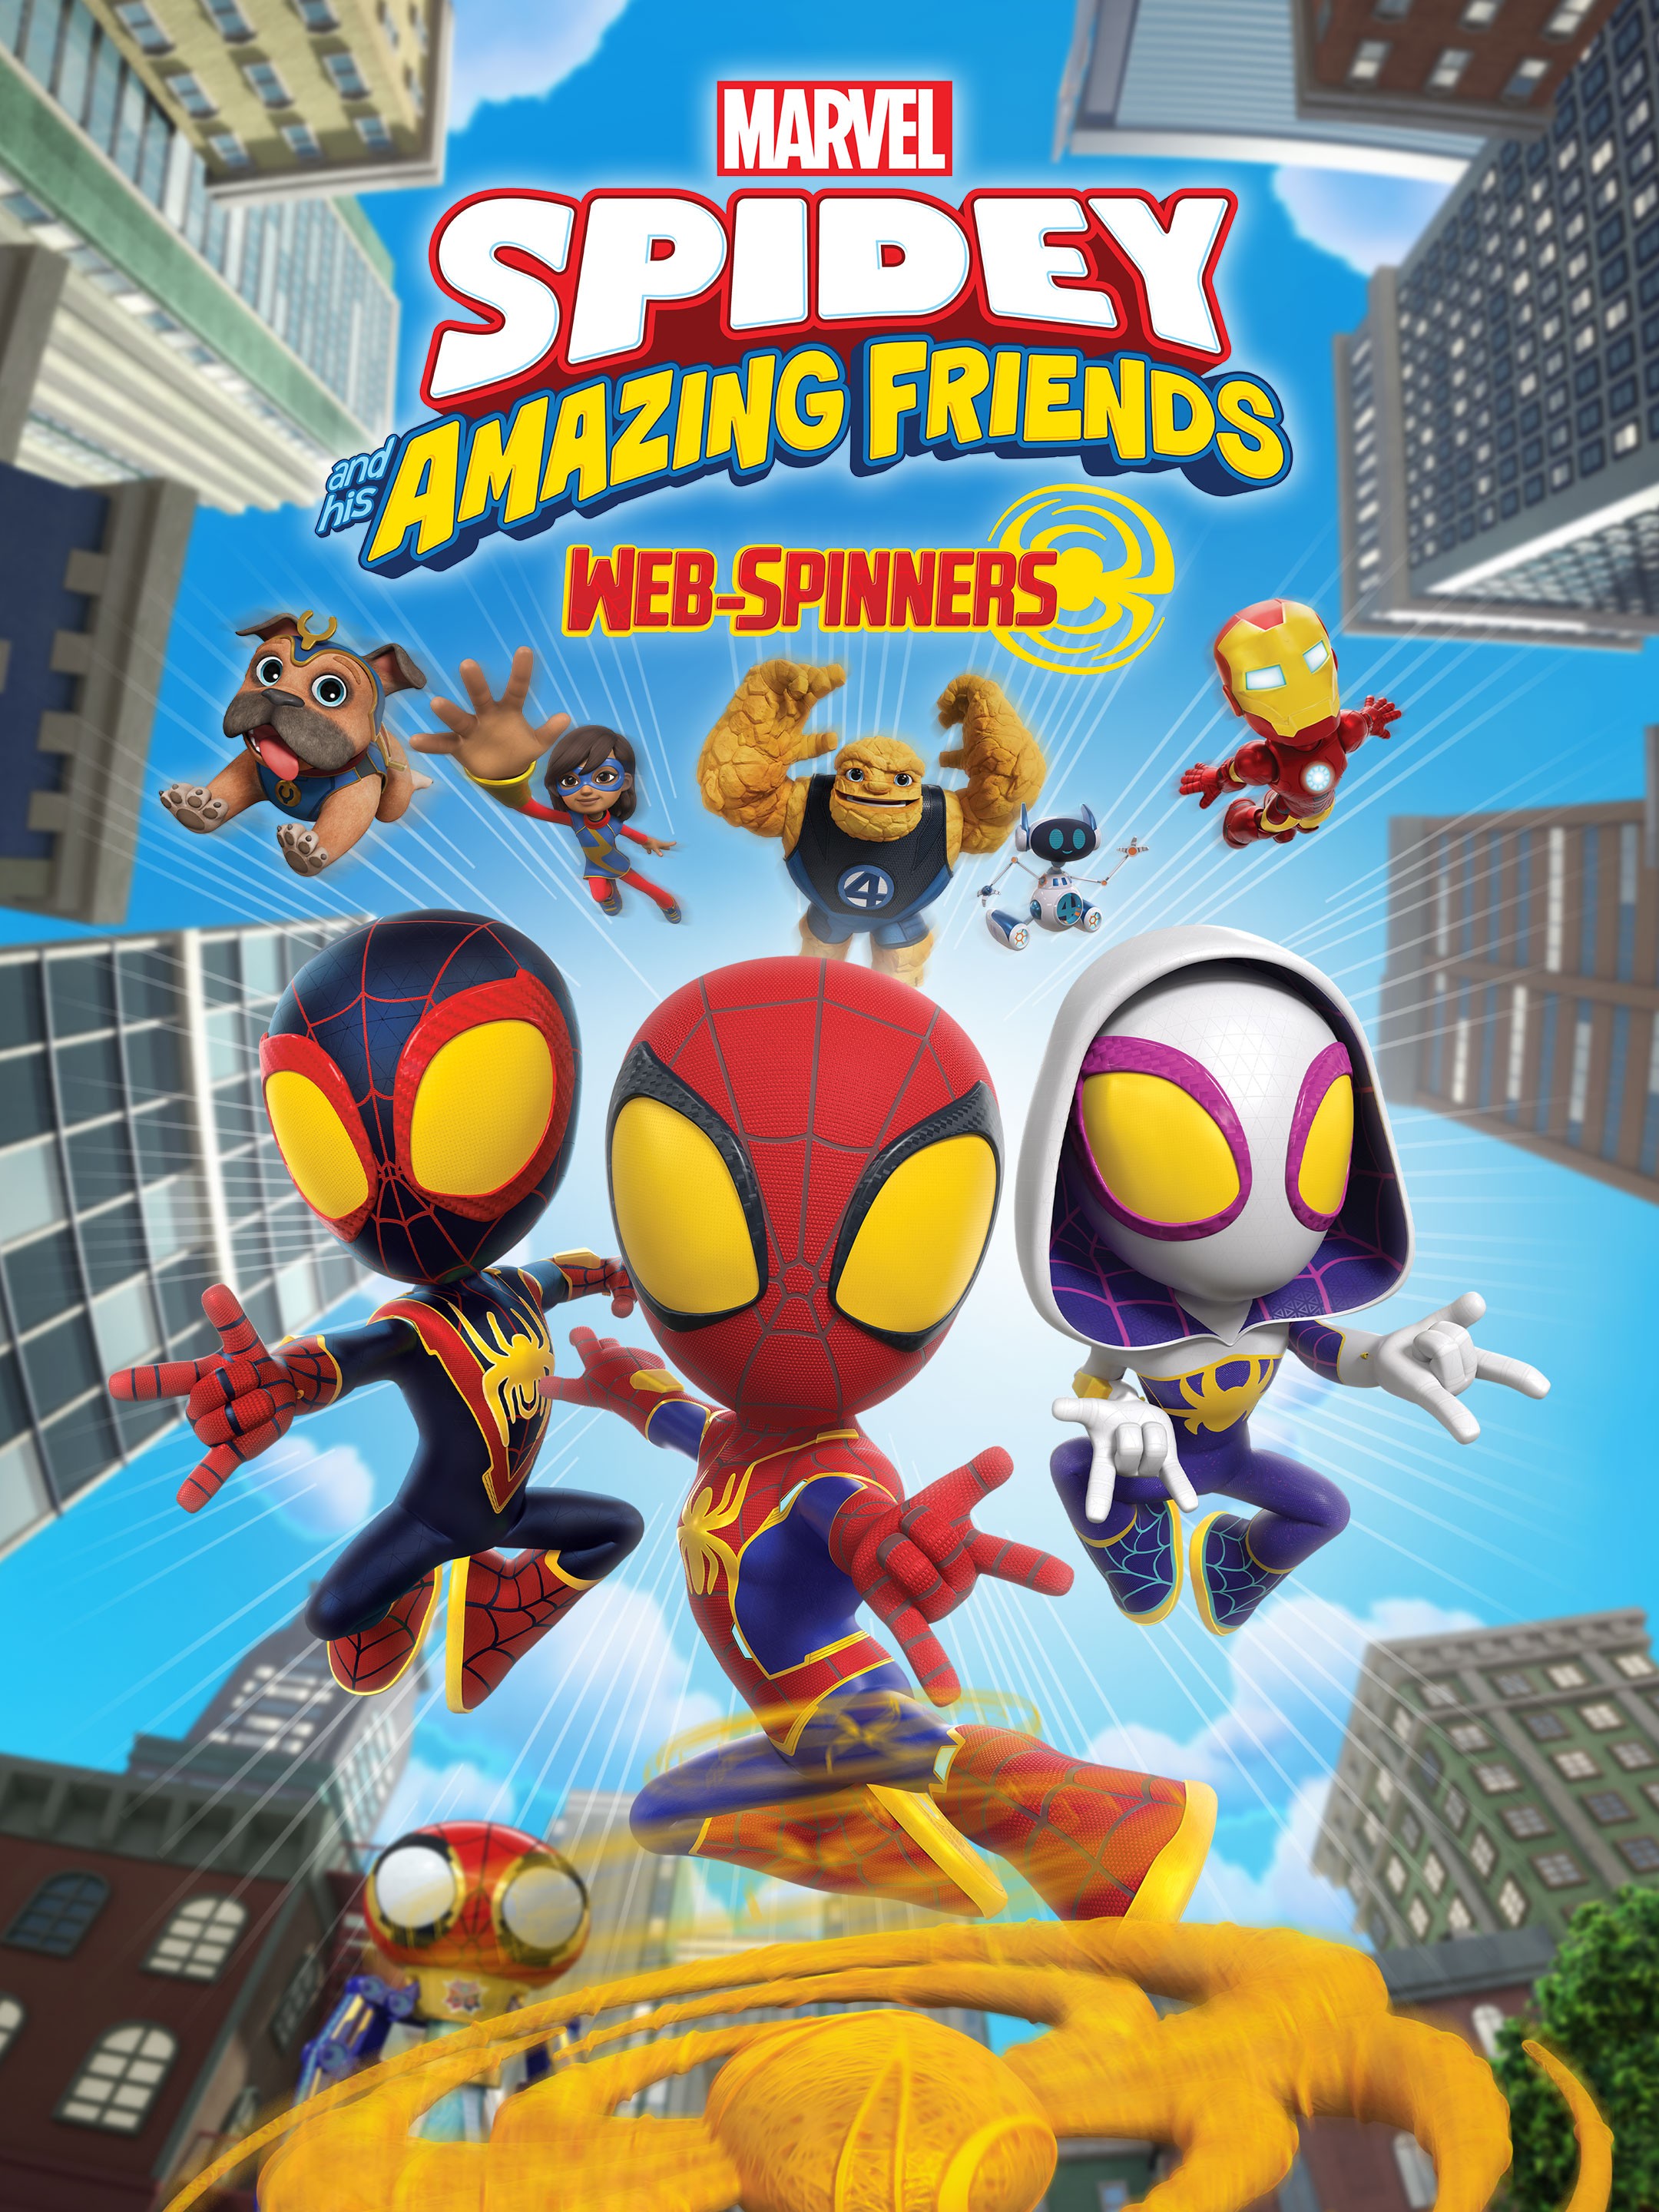 Marvel's Spidey and His Amazing Friends: Season 3